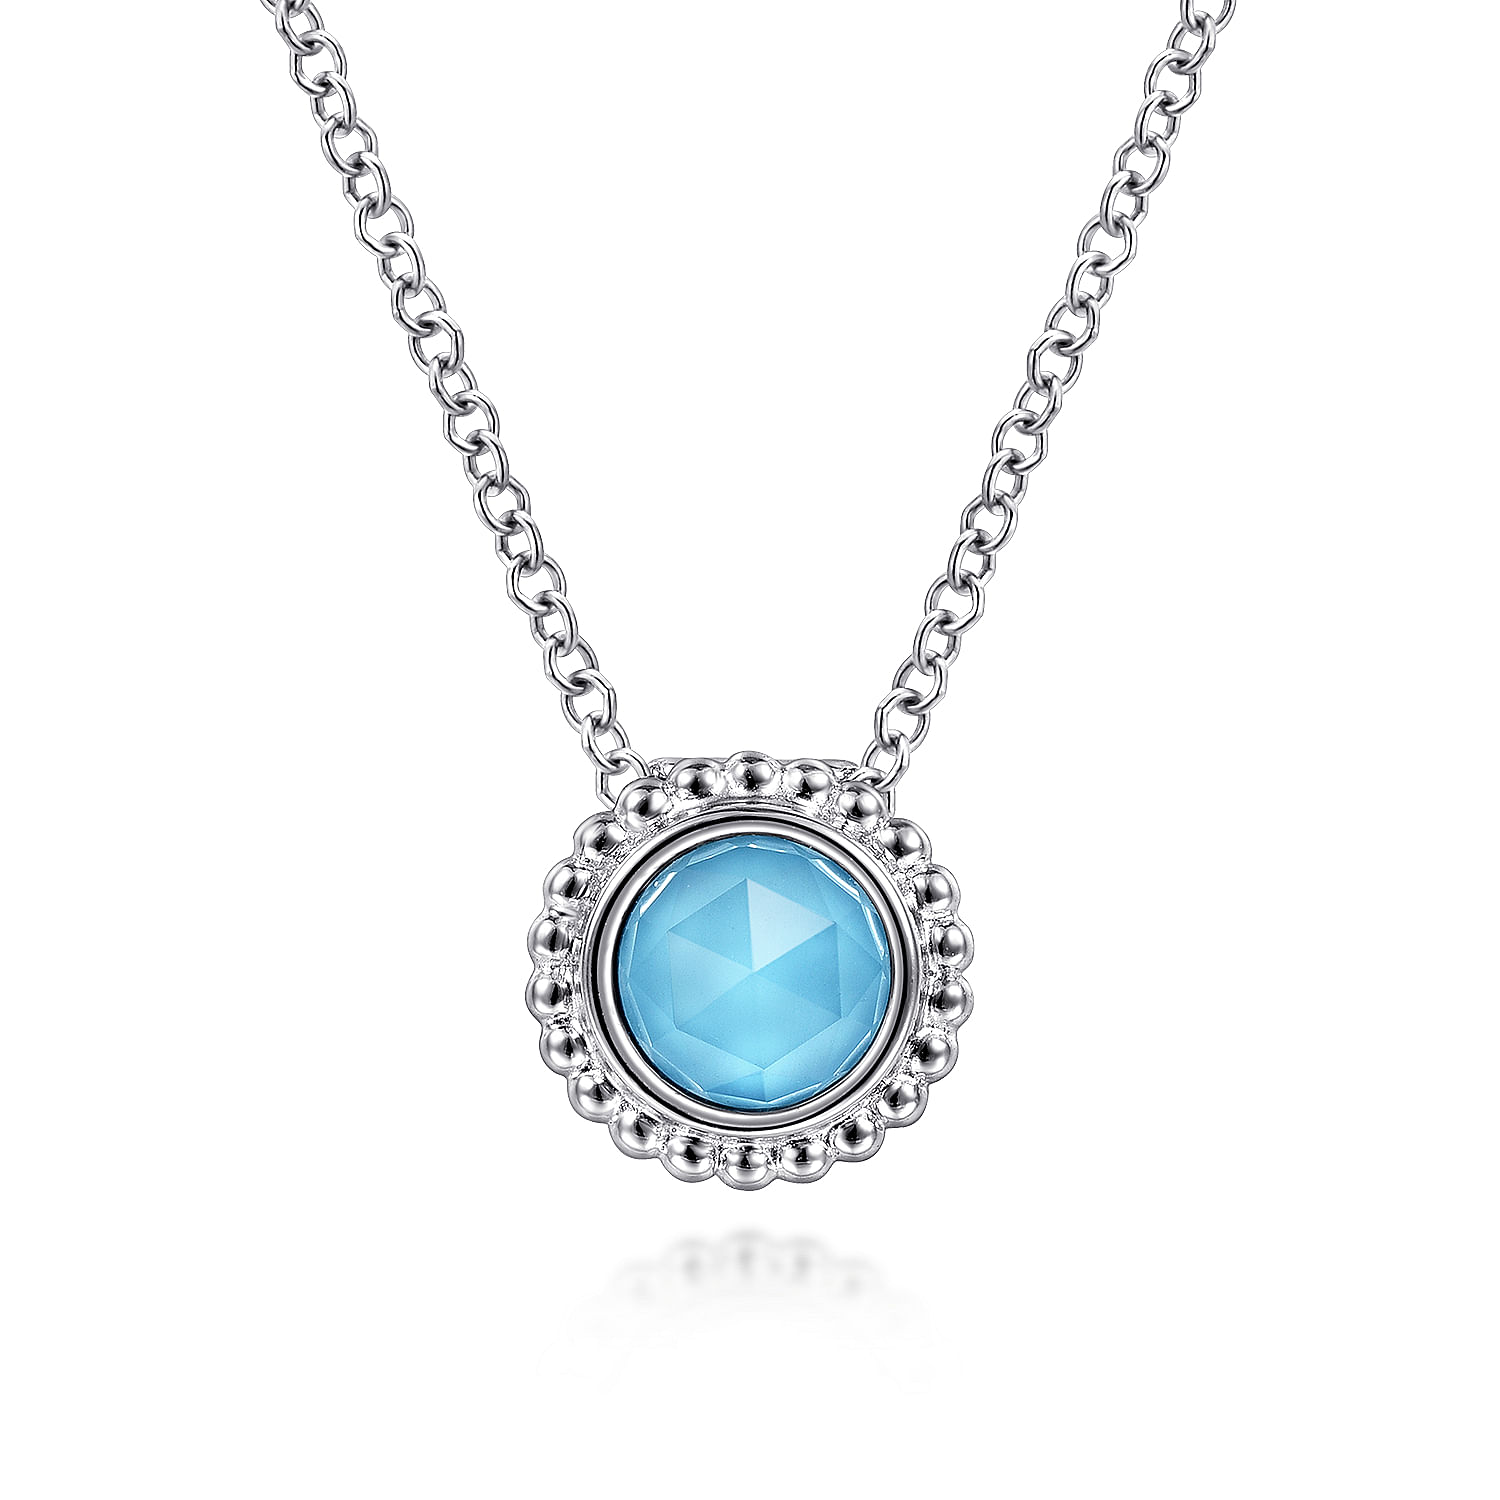 Gabriel - 925 Sterling Silver Bujukan Rock Crystal and Turquoise Pendant Necklace